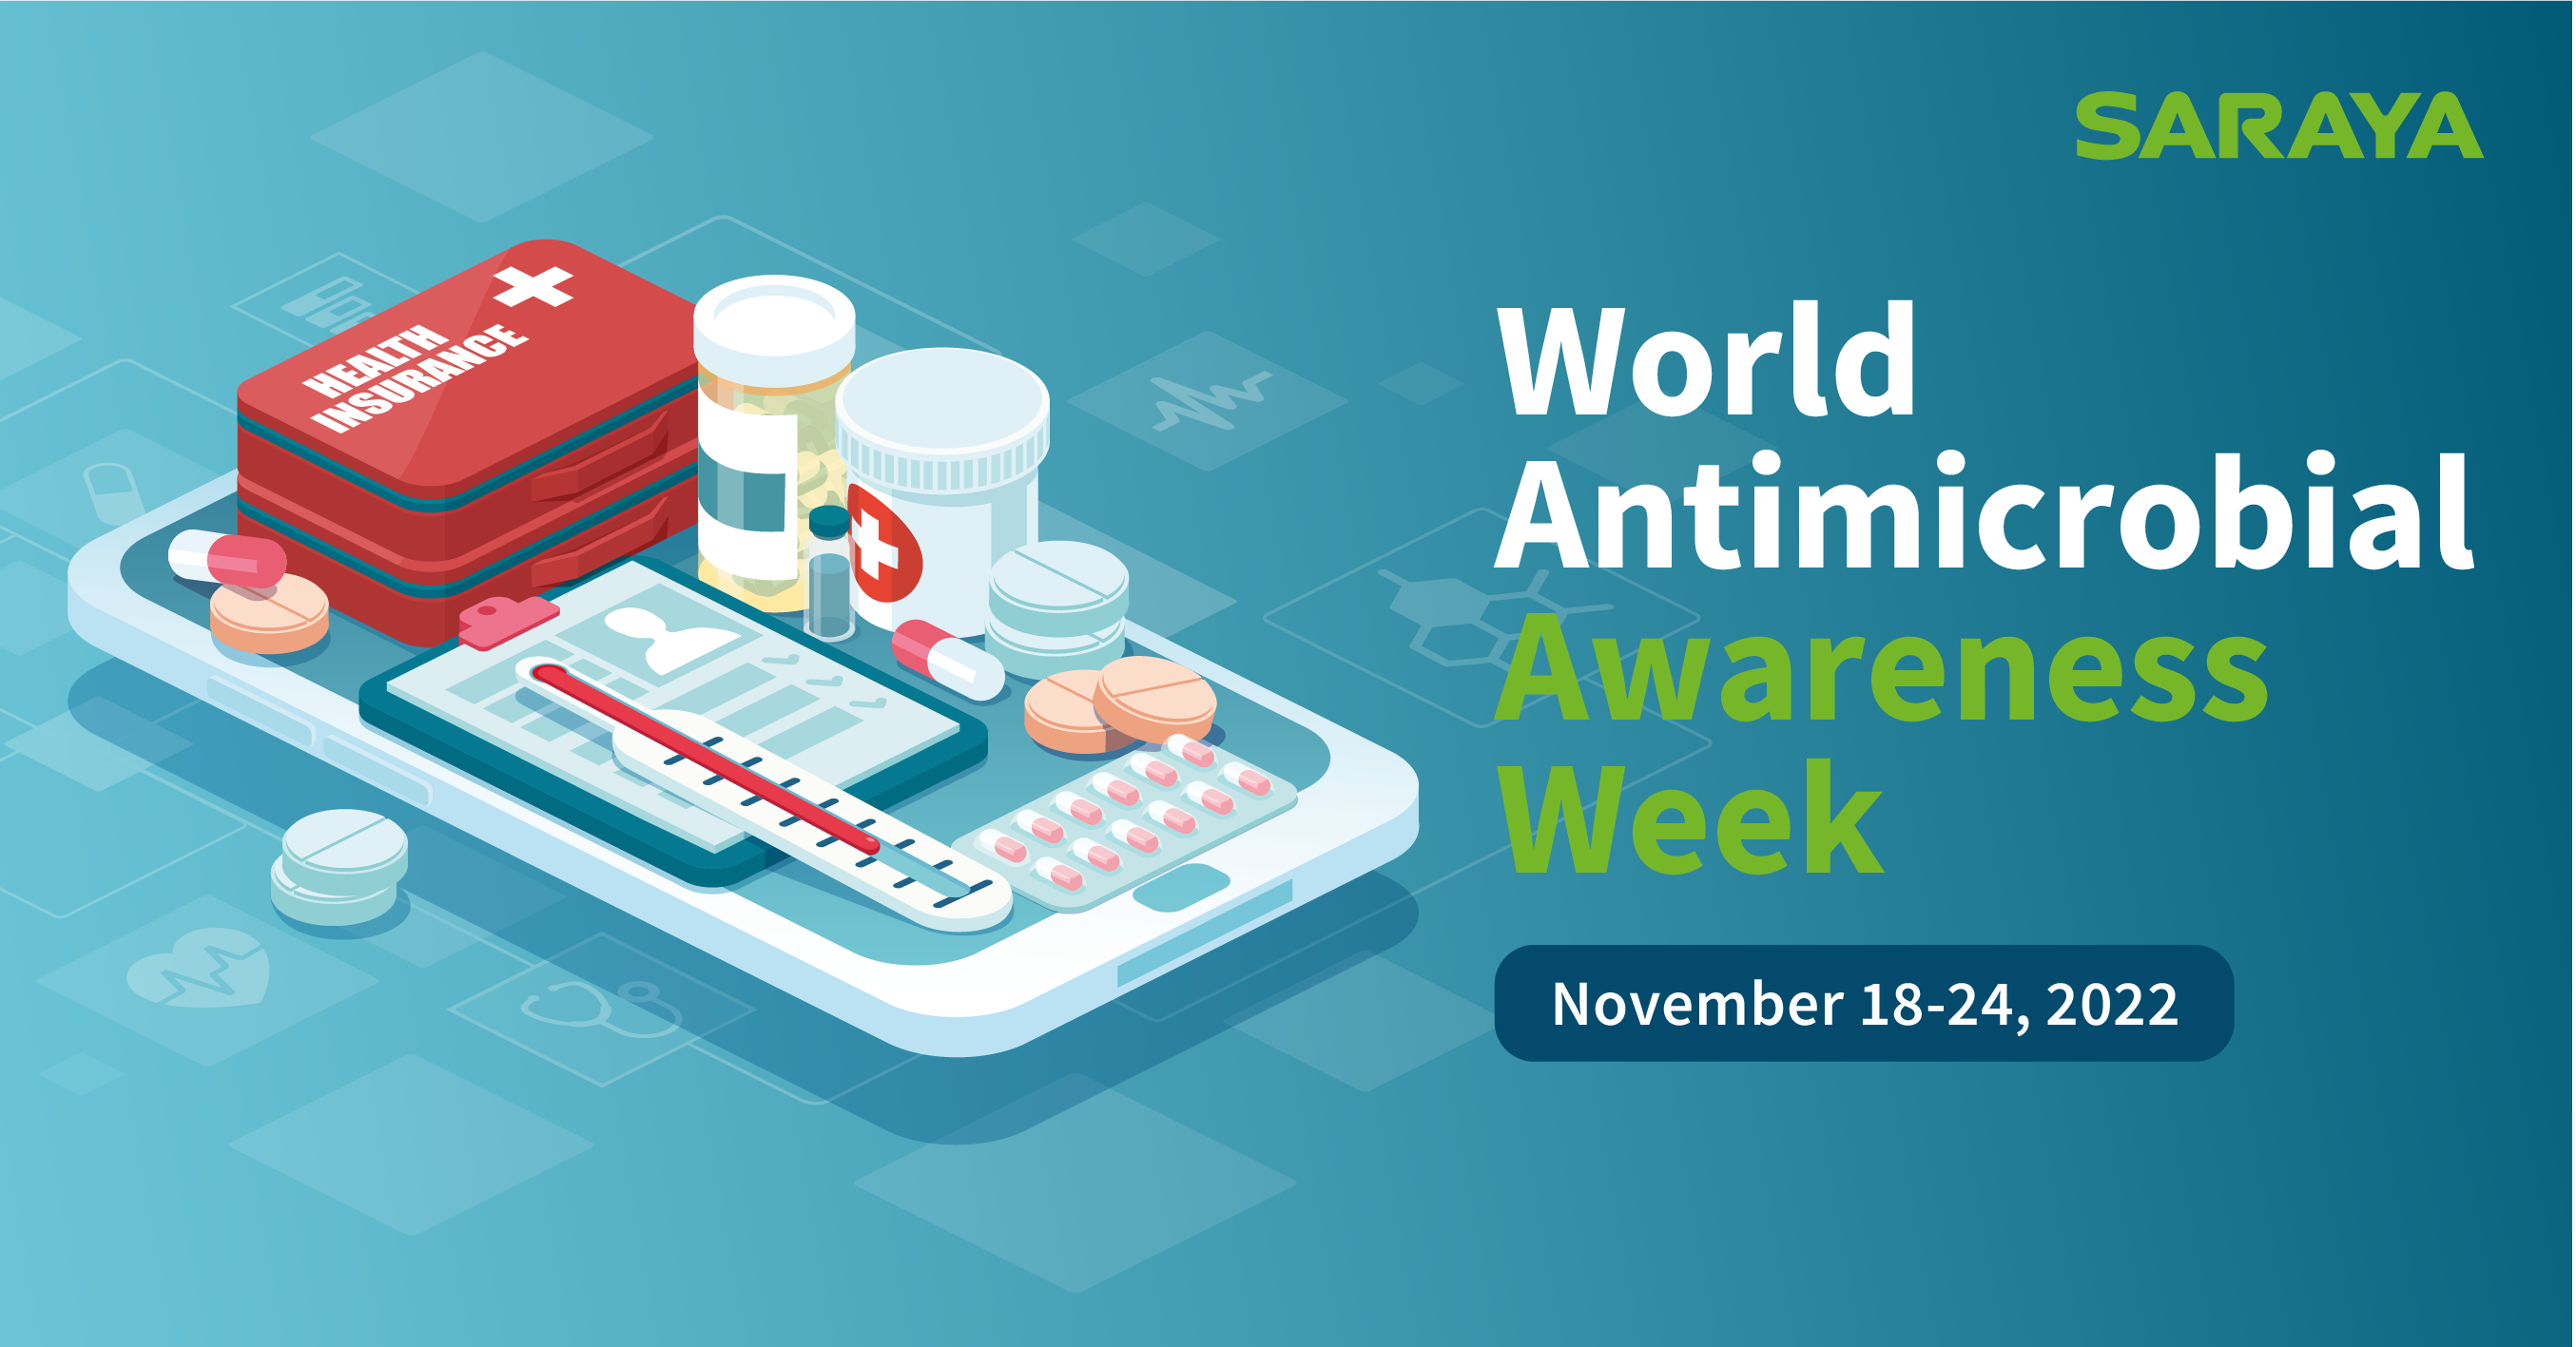 SARAYA takes part in the Antimicrobial Awareness Week annual WHO campaign, which will be held on 18-24 November 2022.